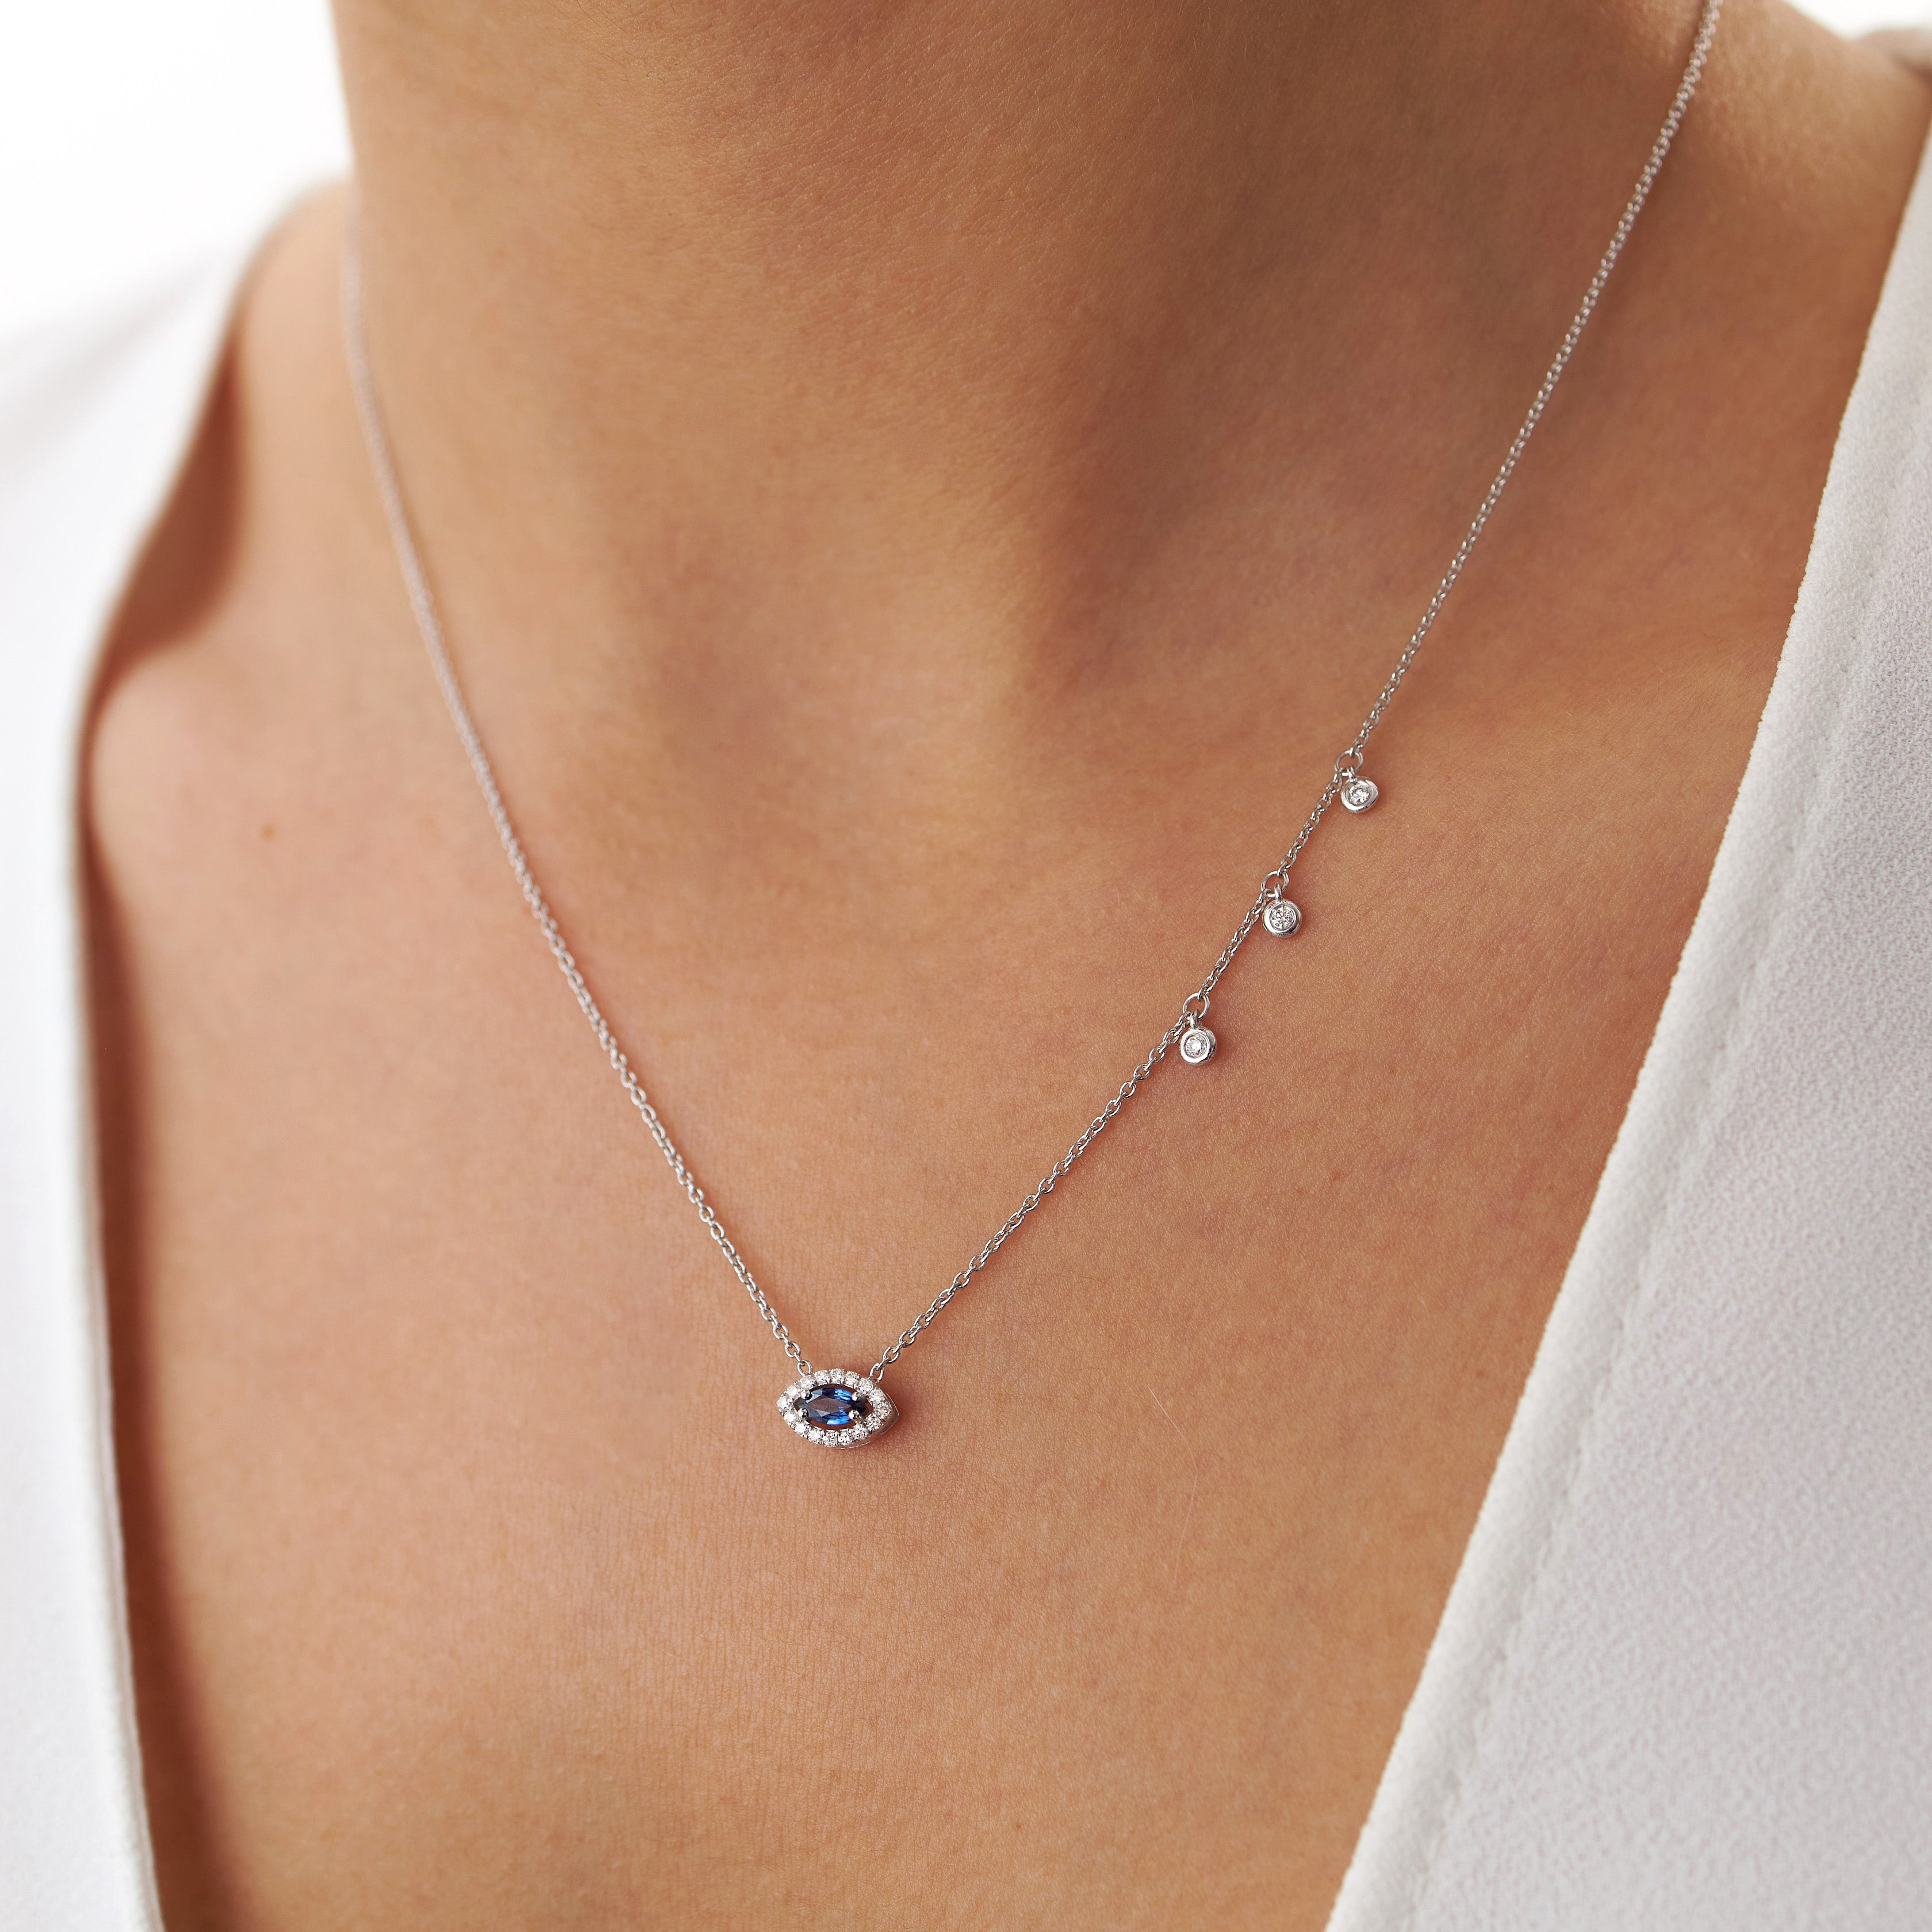 Marquise Cut Blue Sapphire and Diamond Necklace Available in 14K and 18K Gold